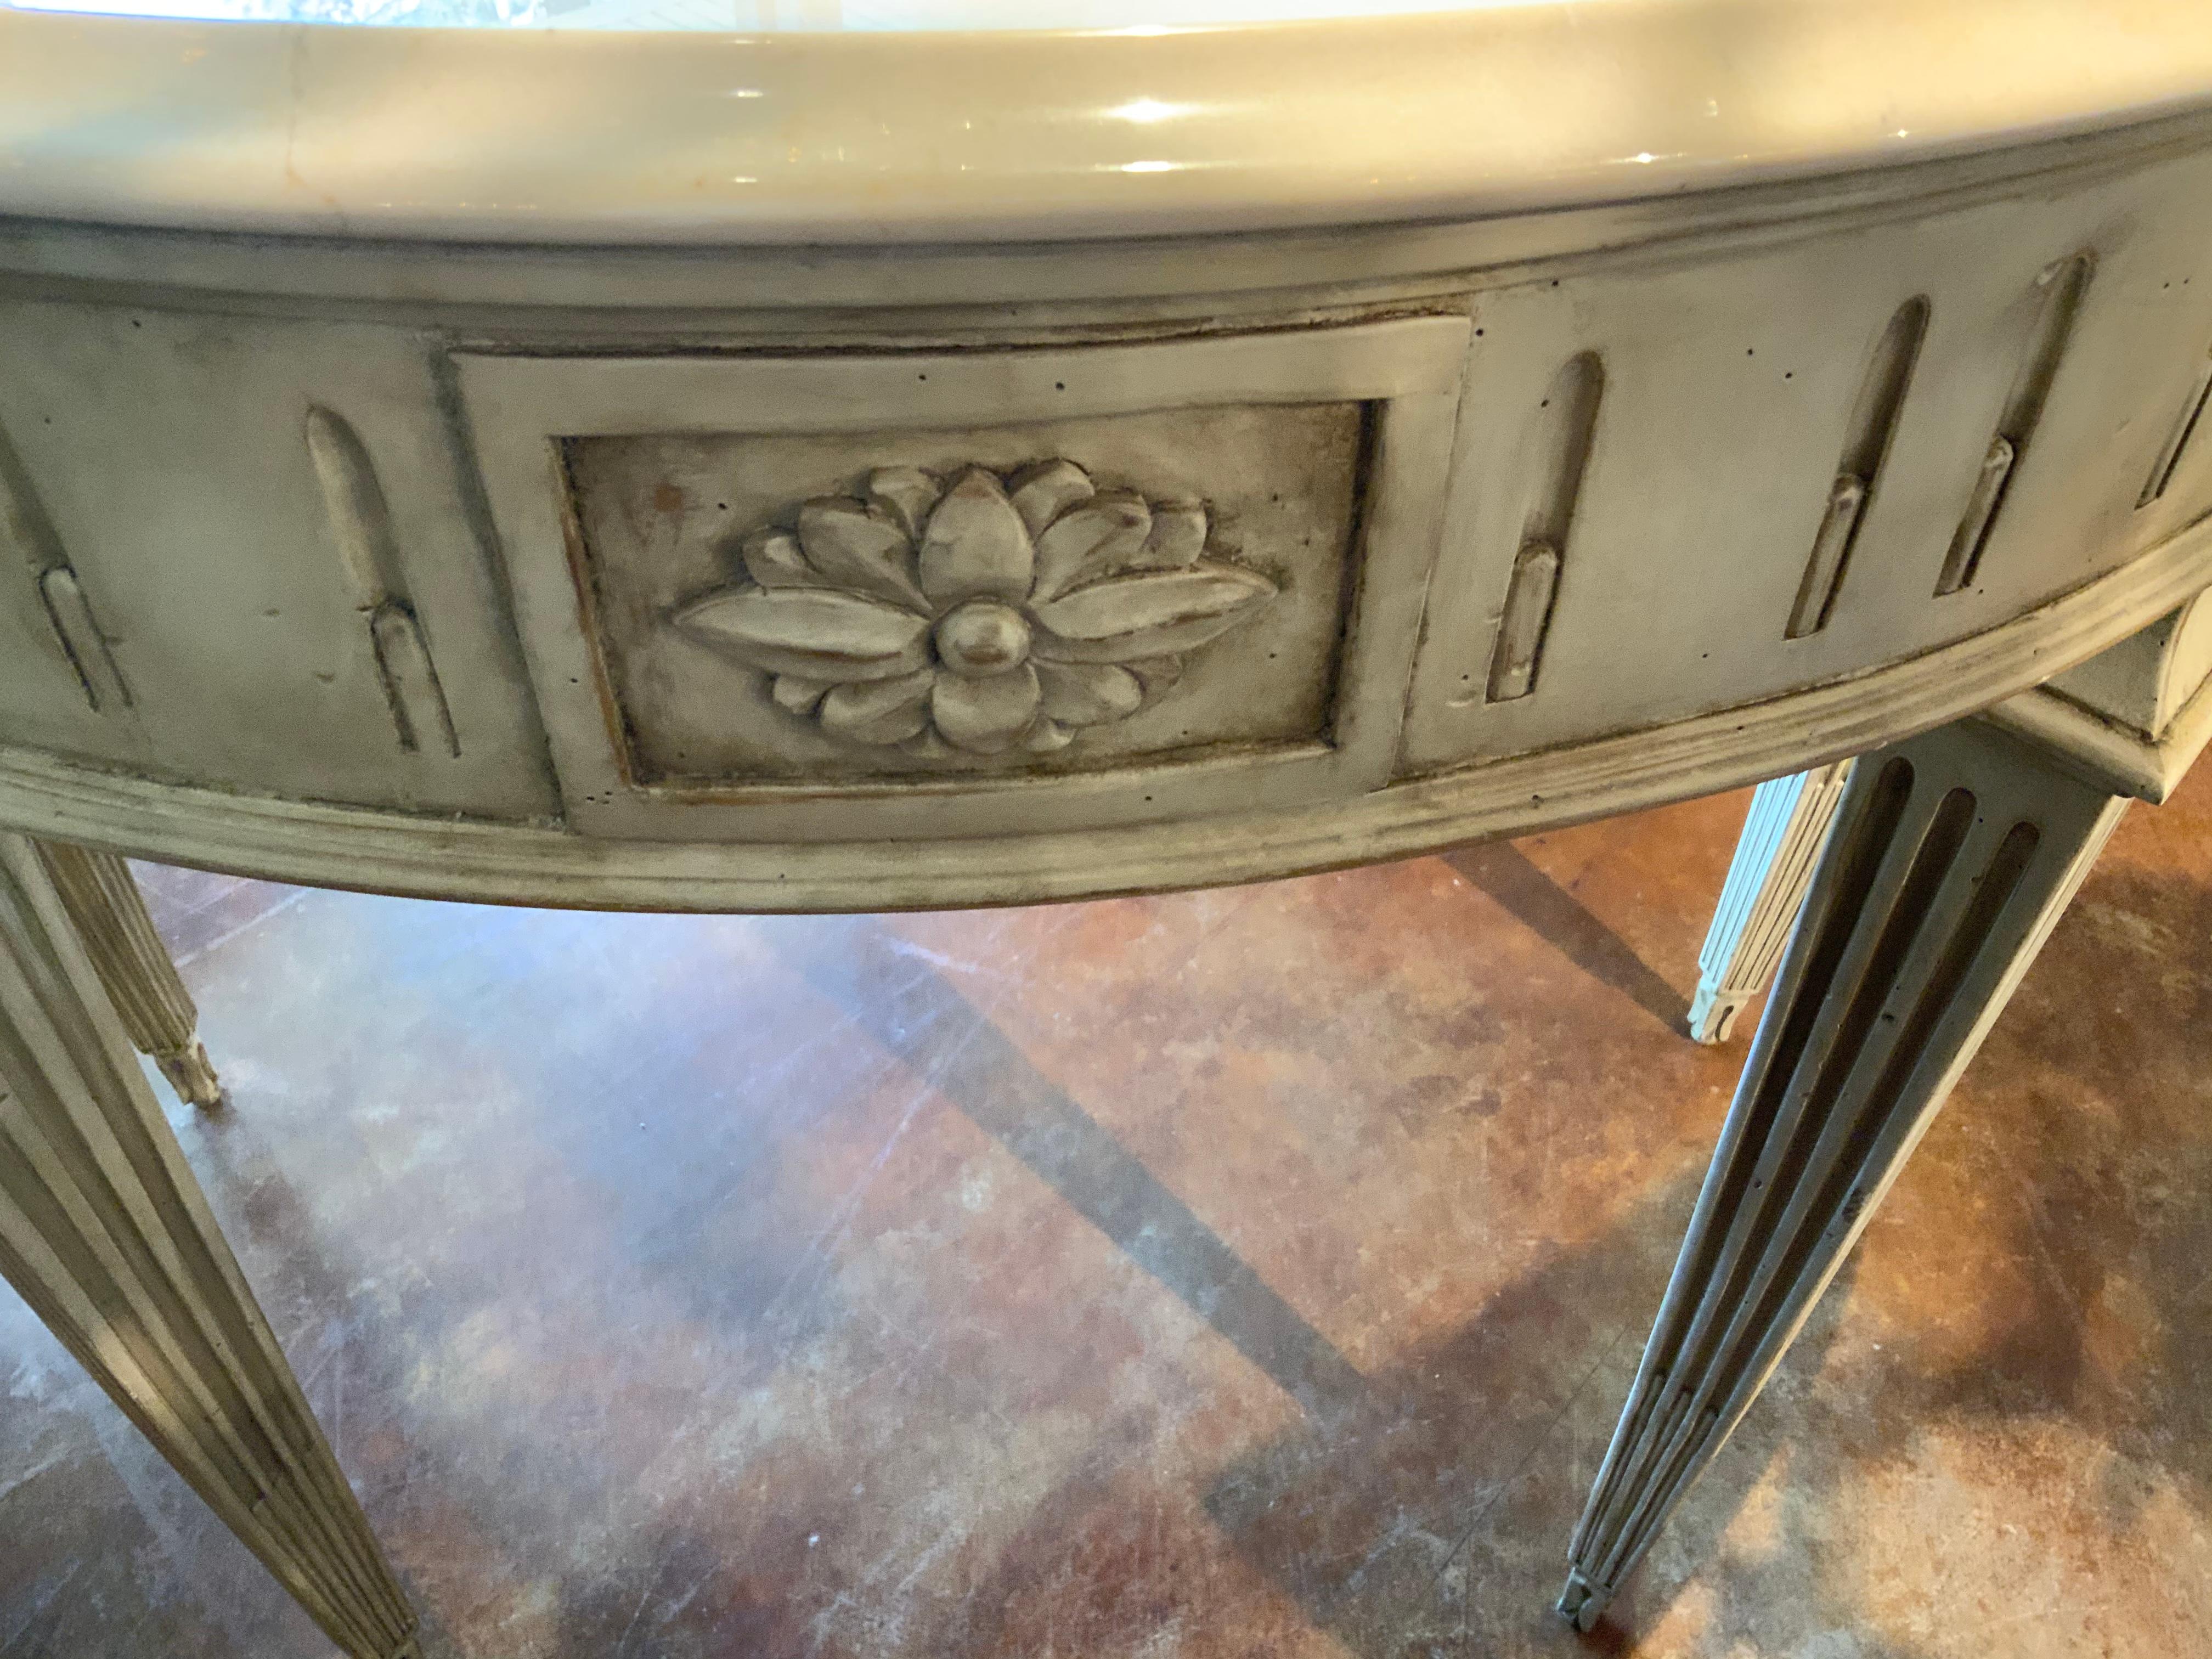 Stylized demi-lune shaped console, painted in a creamy white hue rising on Louis XVI-style
Reeded legs. A floral carved motif at the front center and sides.